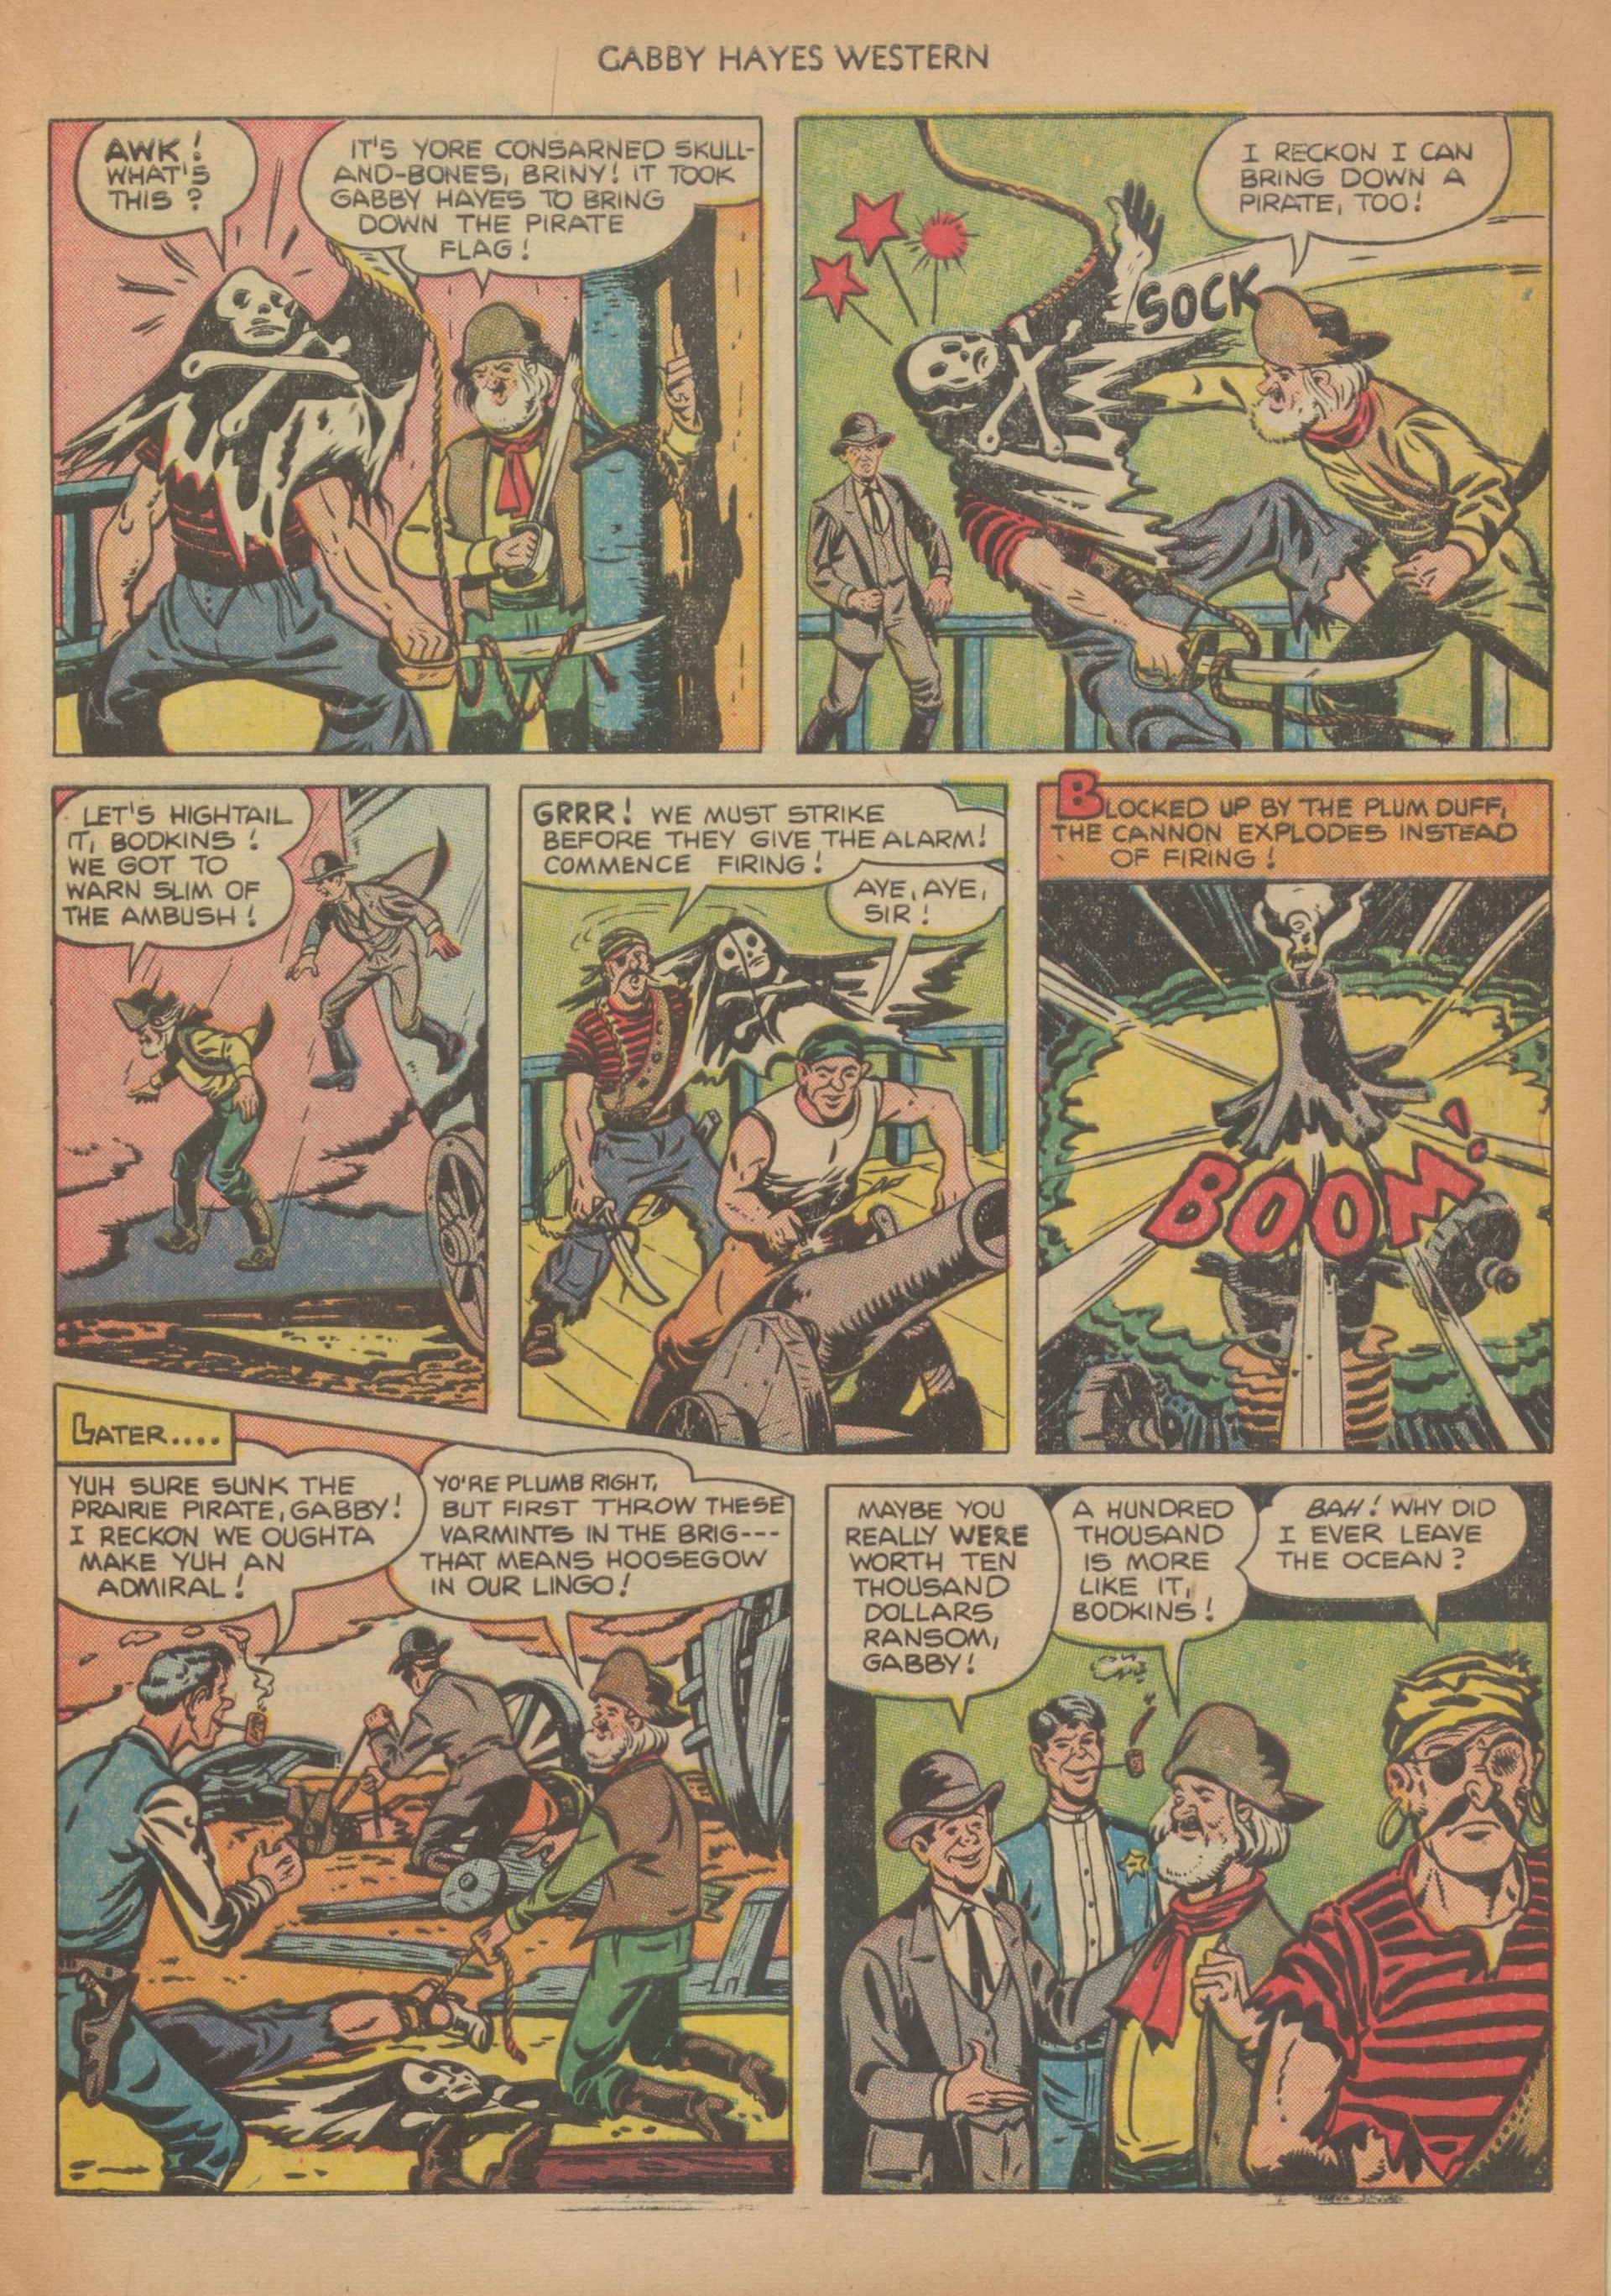 Read online Gabby Hayes Western comic -  Issue #39 - 9